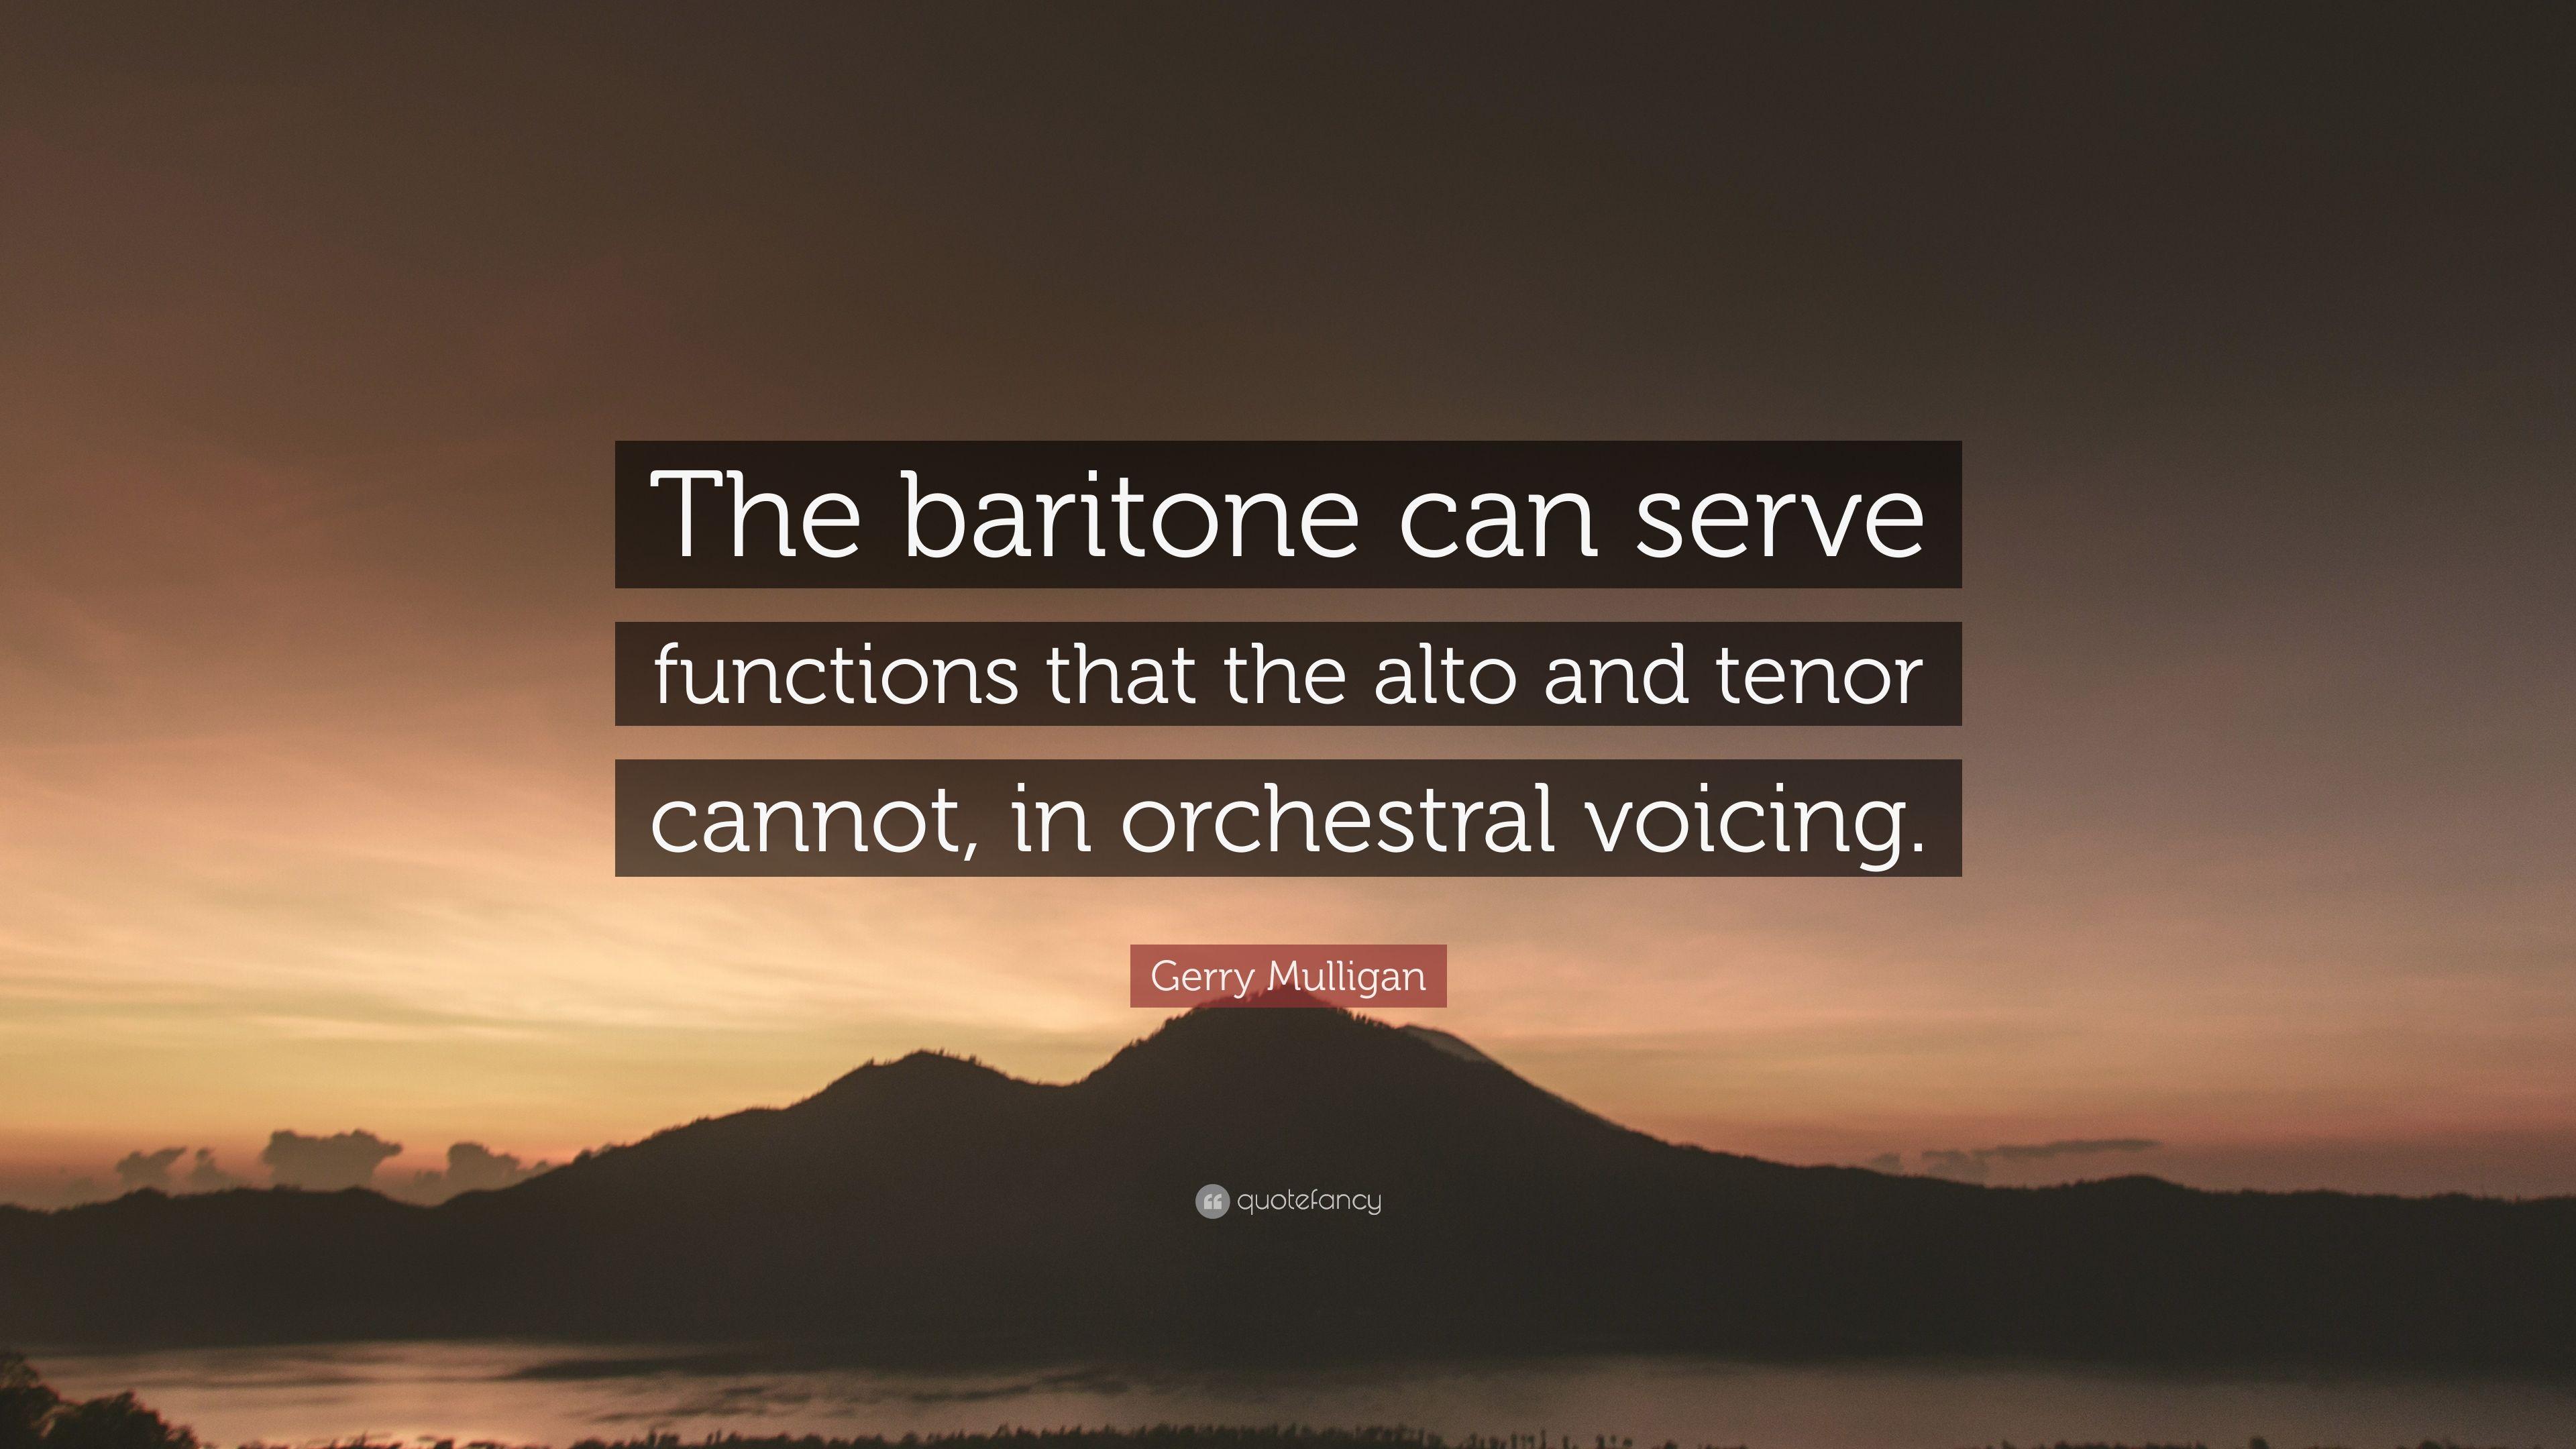 Gerry Mulligan Quote: “The baritone can serve functions that